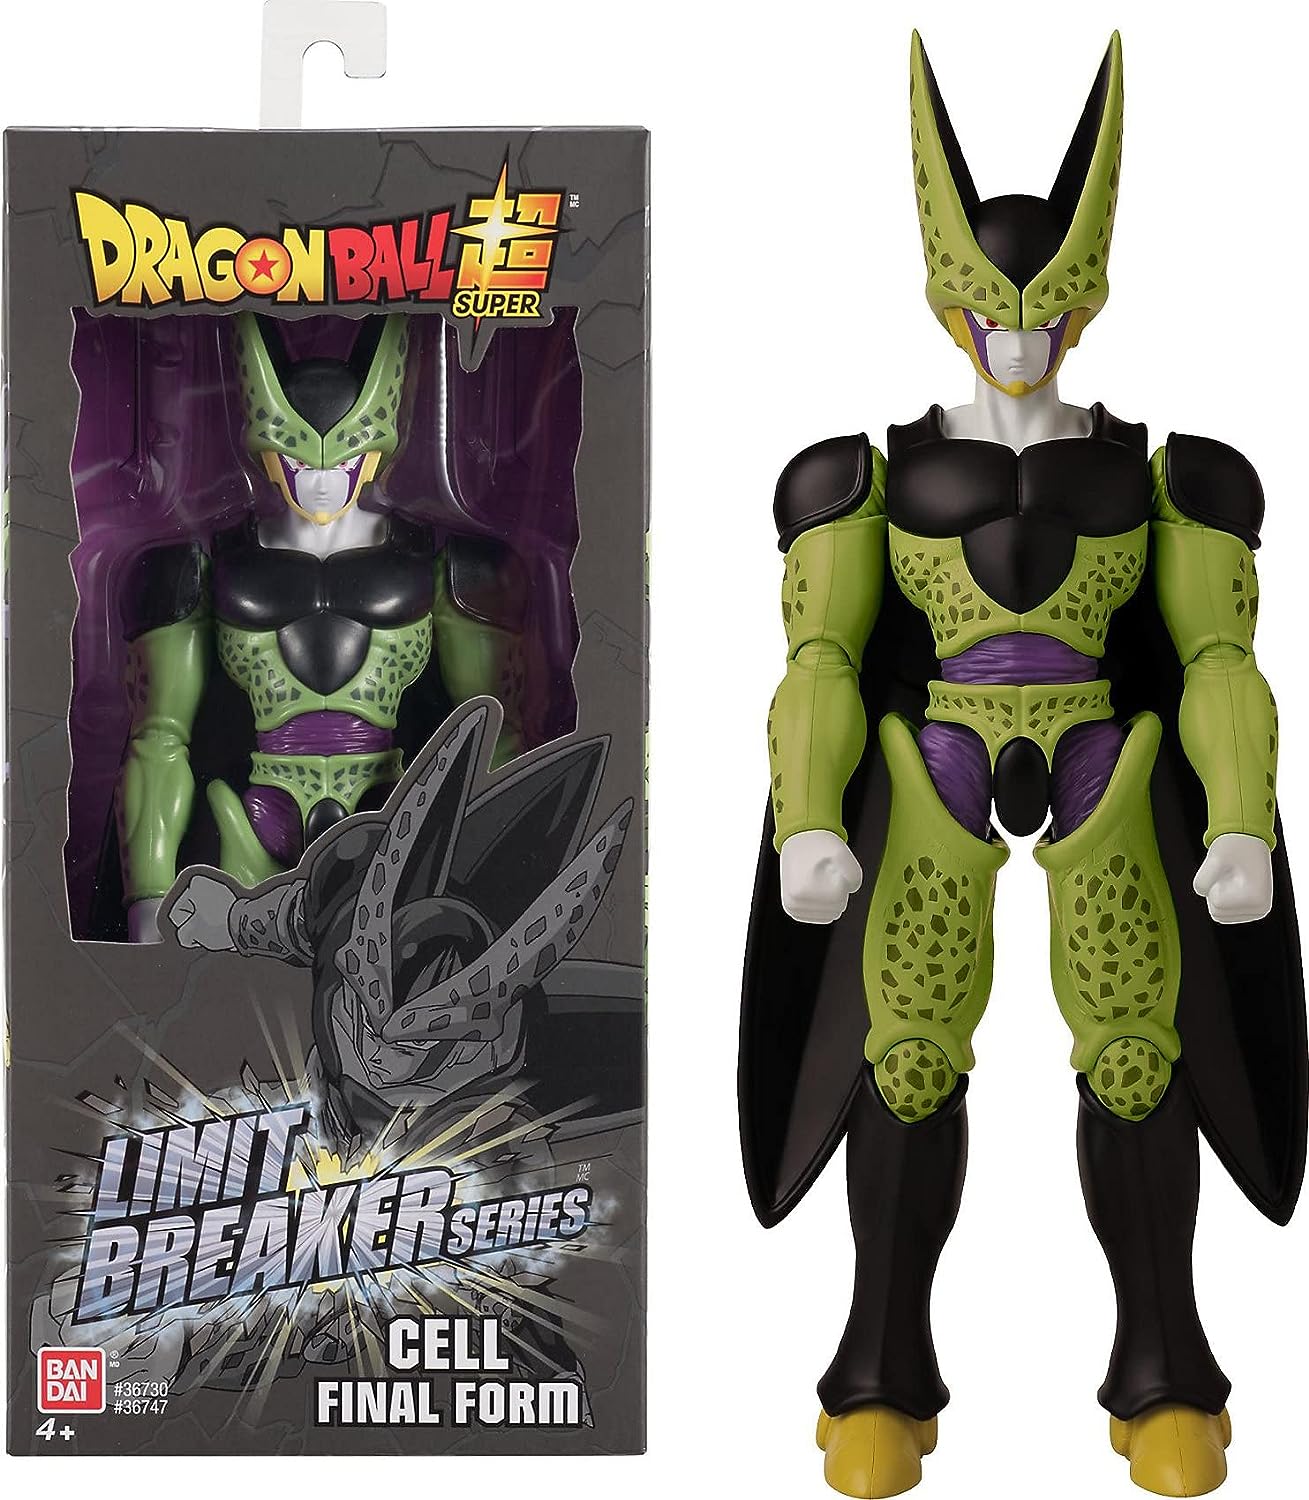 12 Inch Limit Breaker Series - Cell Final Form